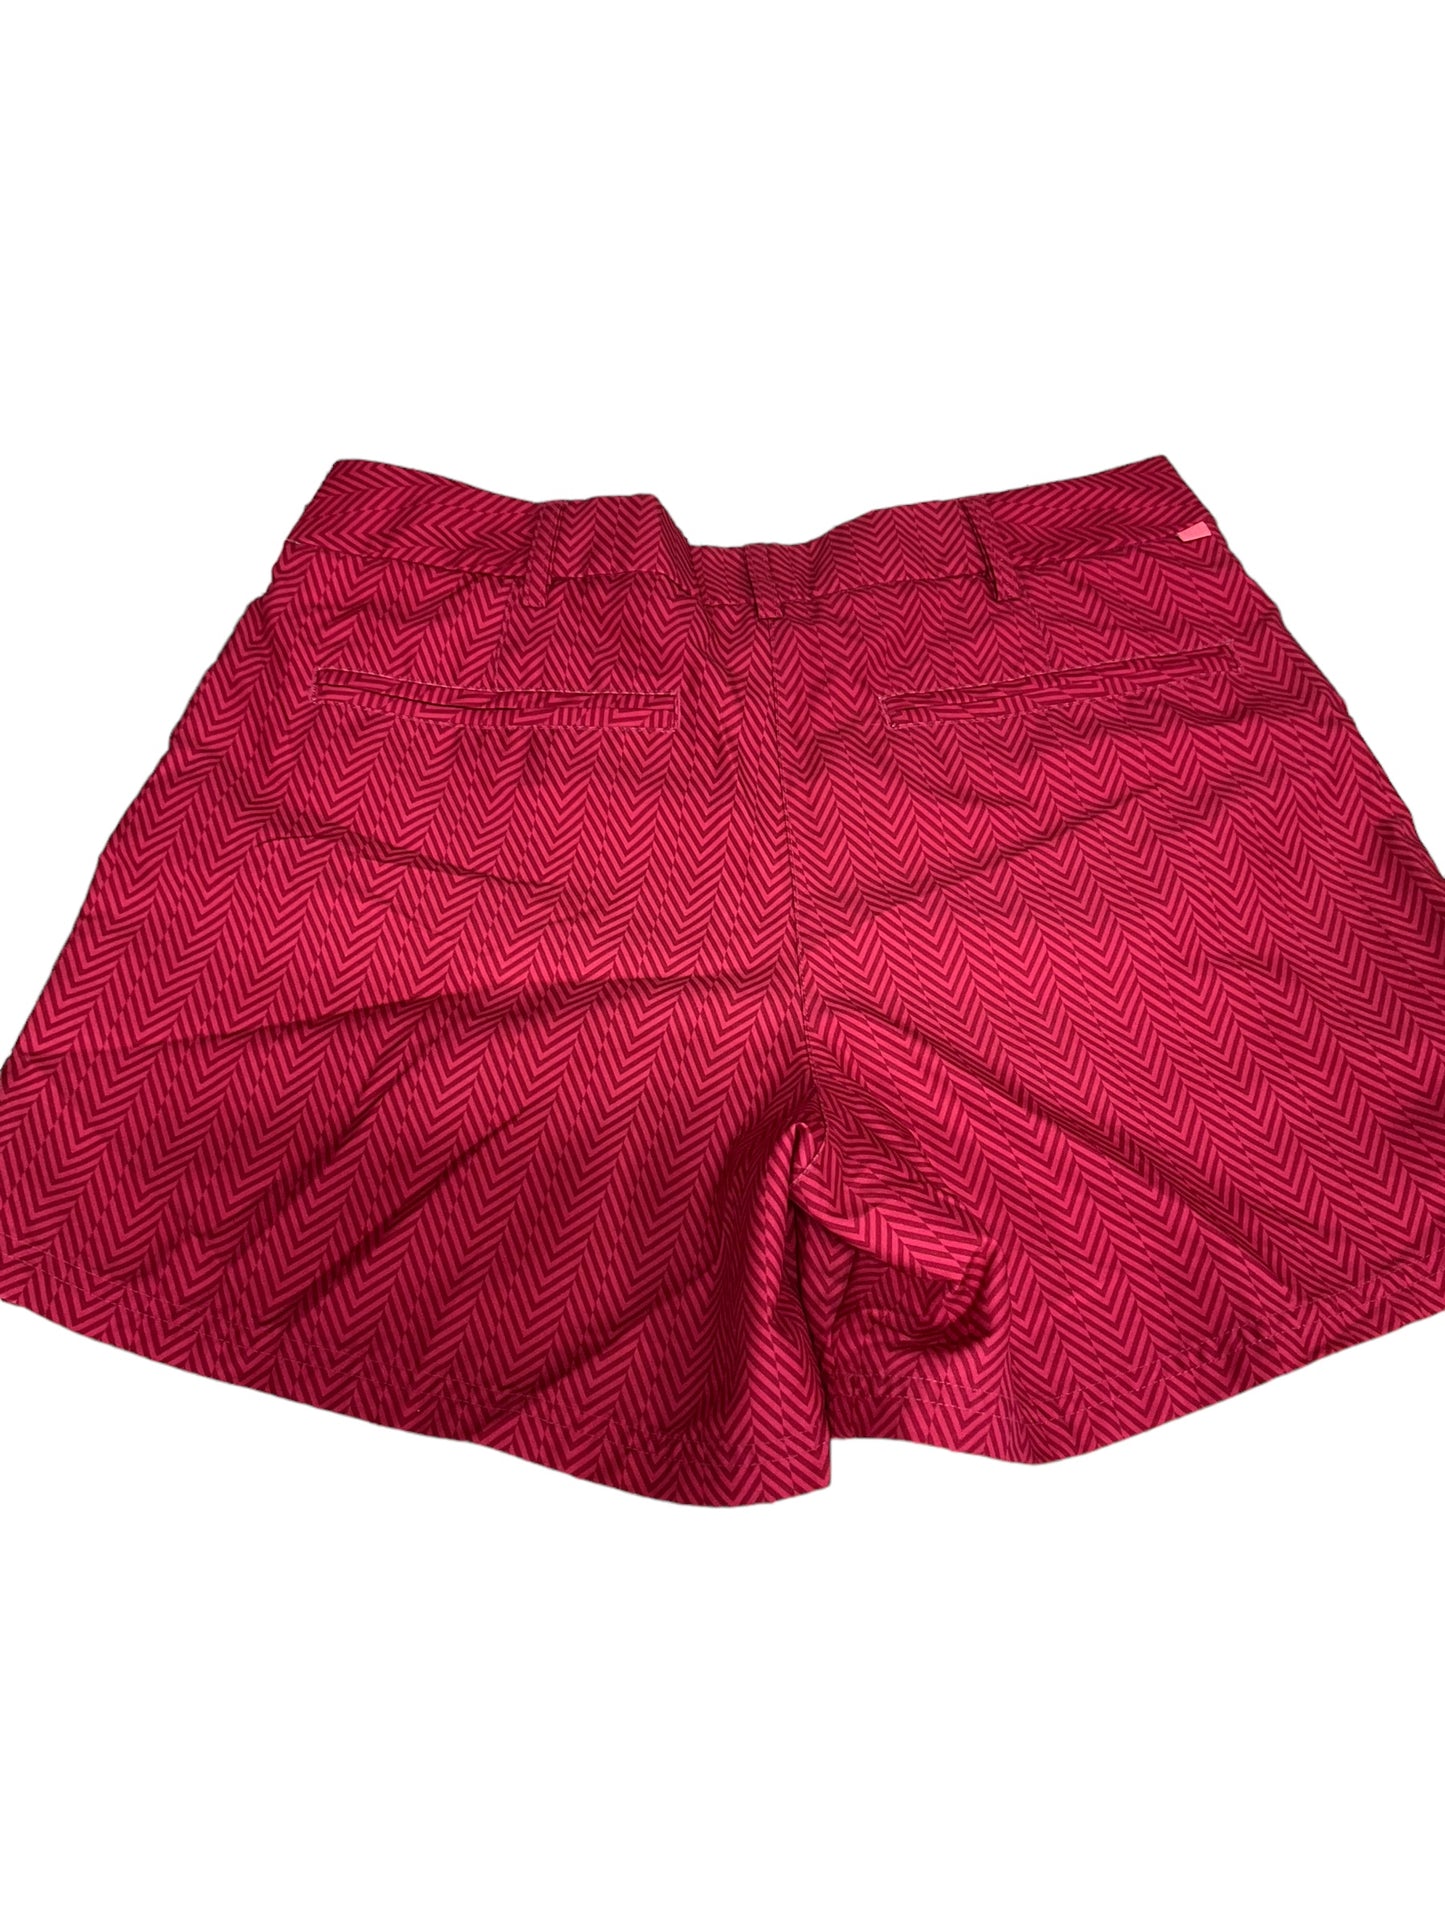 Athletic Shorts By Puma  Size: 12